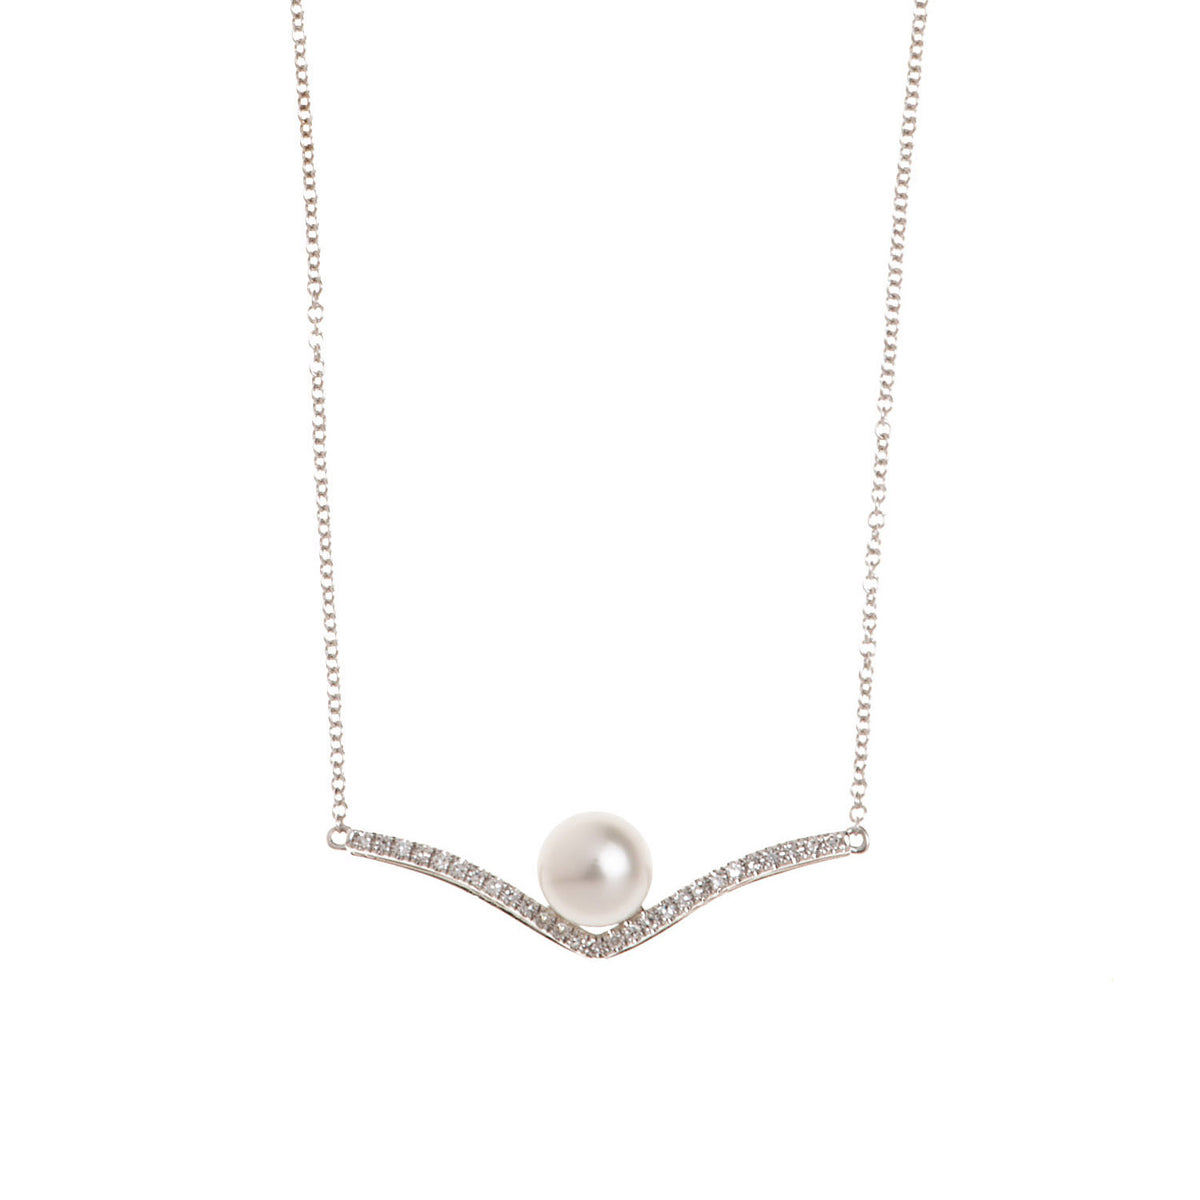 Pearl Necklace. Fresh water pearl. South sea pearl. Sea pearl. Diamond and pearl necklace. Diamond Necklace. Chain necklace. Classic Necklace. Rose gold Necklace. White Gold Necklace. Yellow gold Necklace. Pearl Gift. Fine jewelry. Anatol jewelry. Golden Hall. Kifissia.